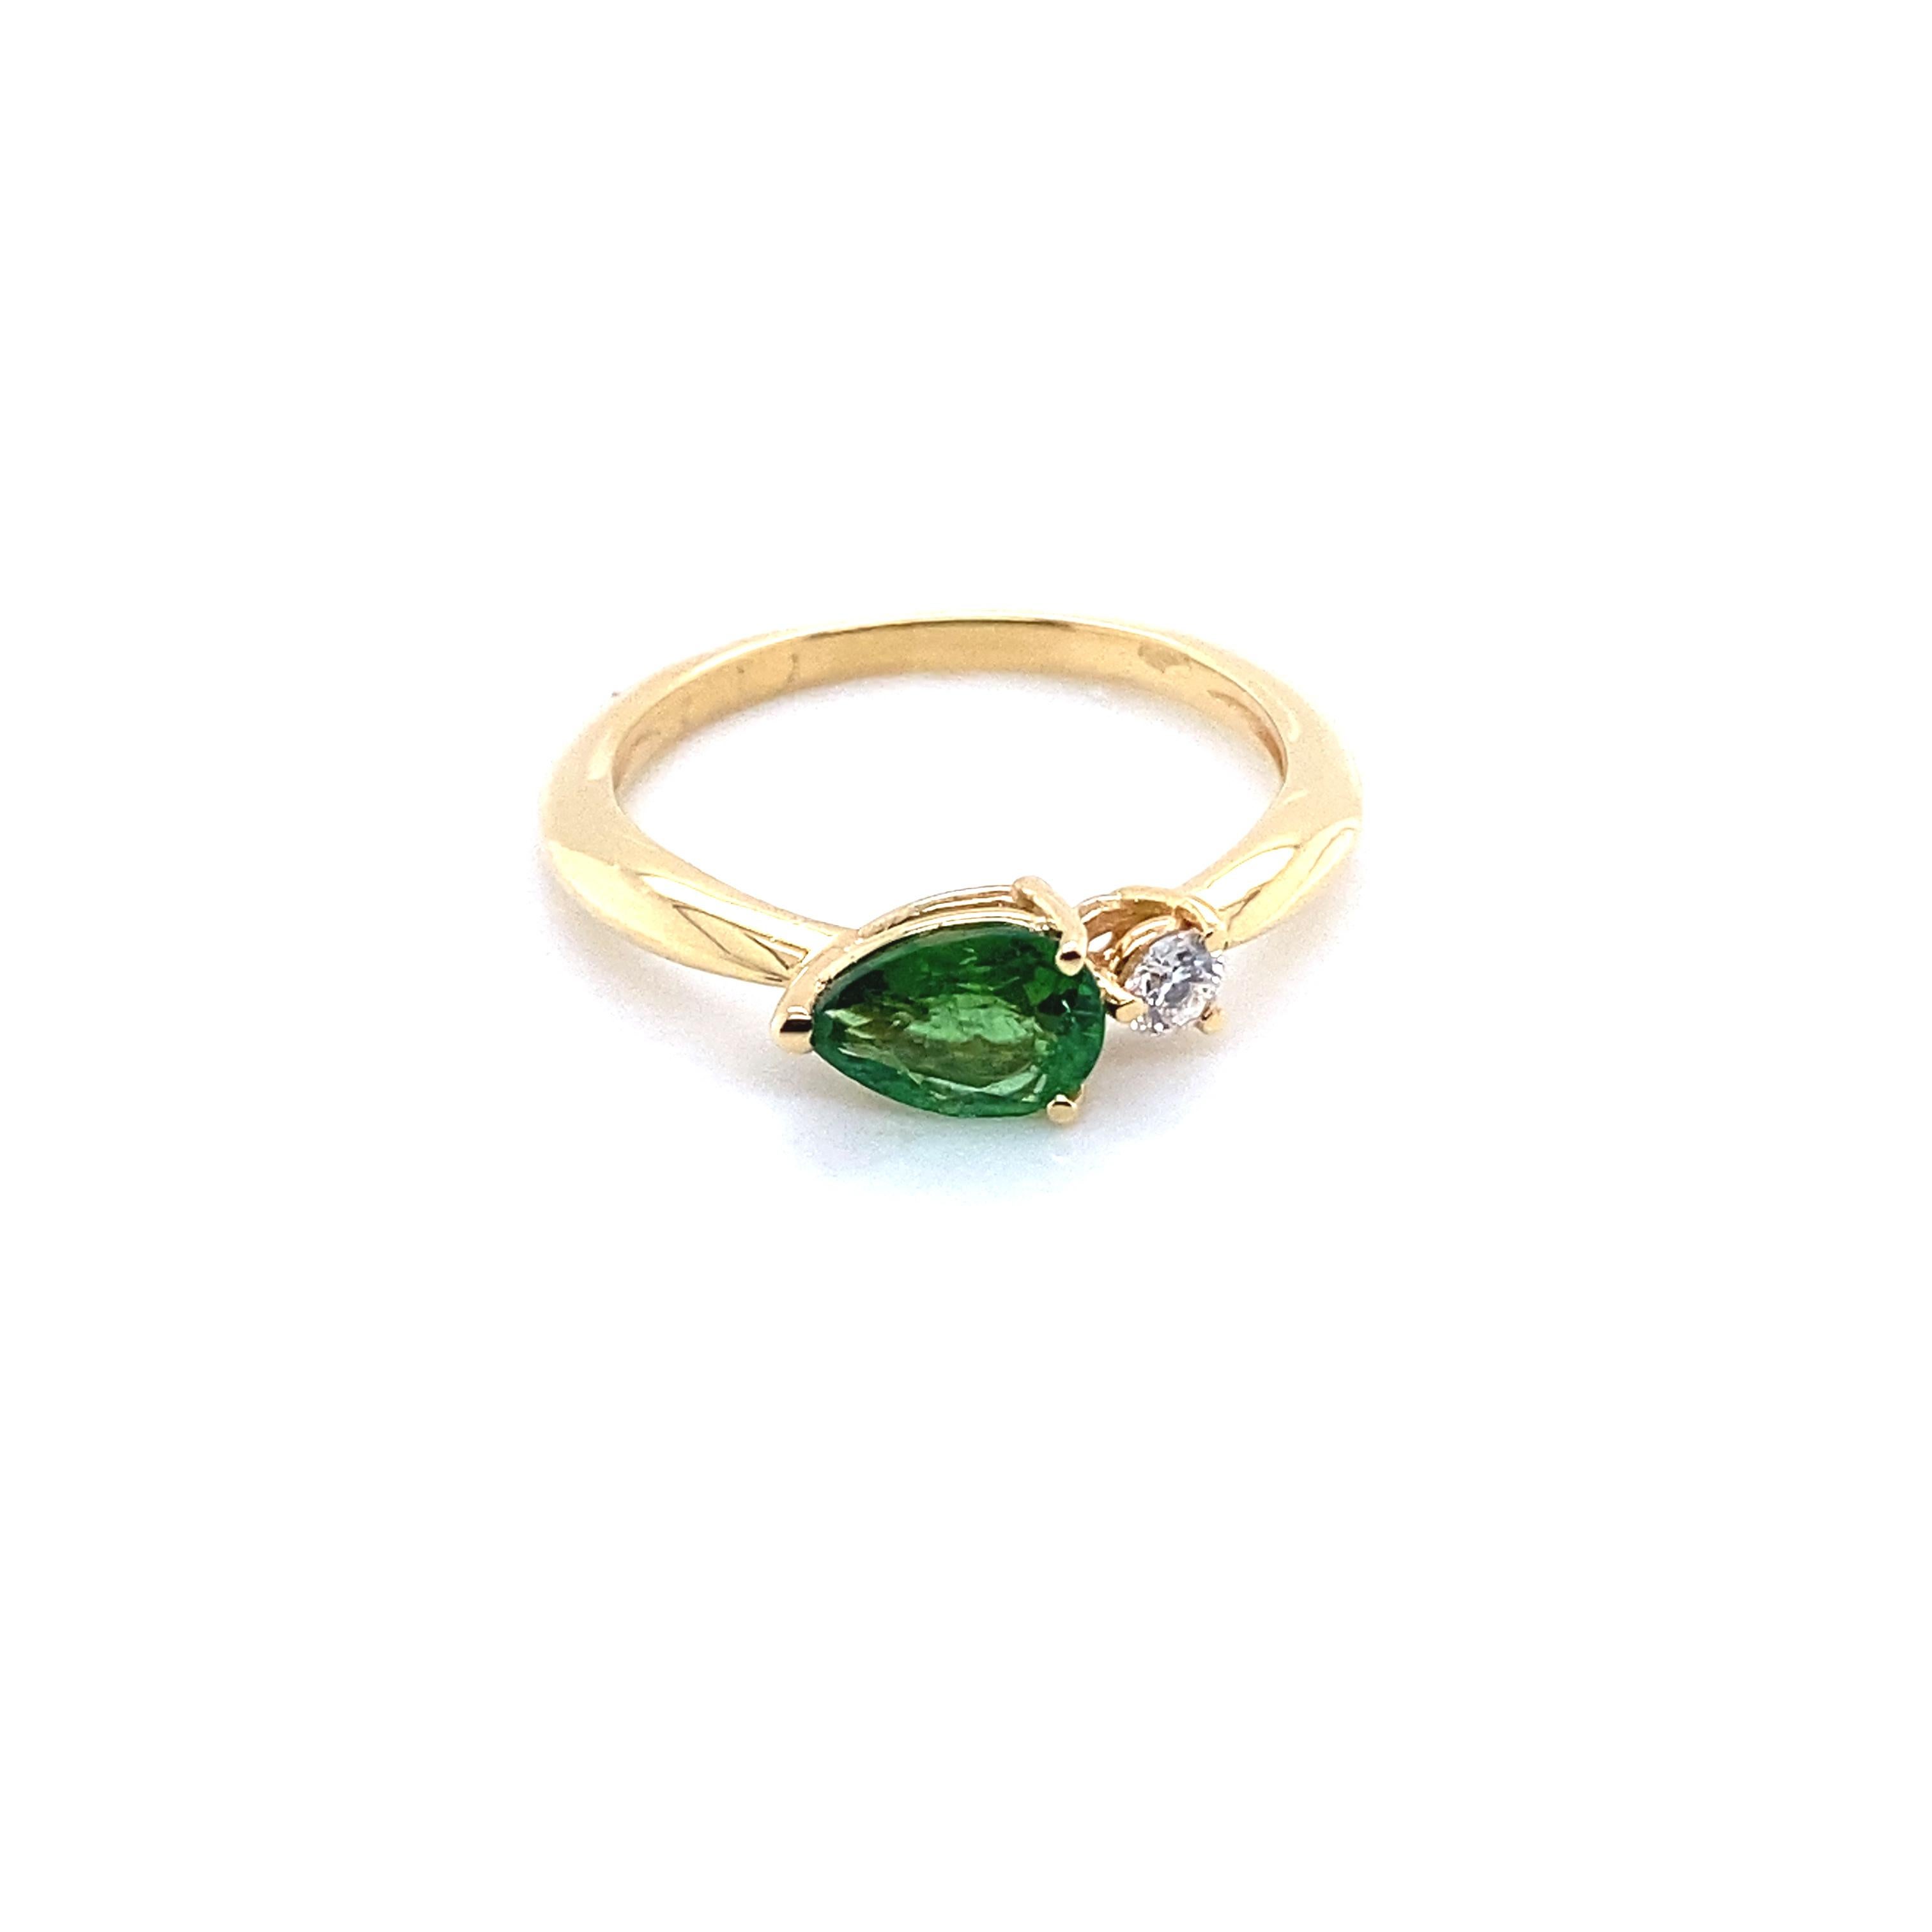 Engagement Ring in Gold with a Green Tourmaline and a Diamond
French Collection by Mesure et Art du Temps.

18 Karats Ring 
The Green Tourmaline is 0.8cm in length and 0.5 cm in width.
The Diamond is 0.09 grams of carats. 
The weight of the gold is